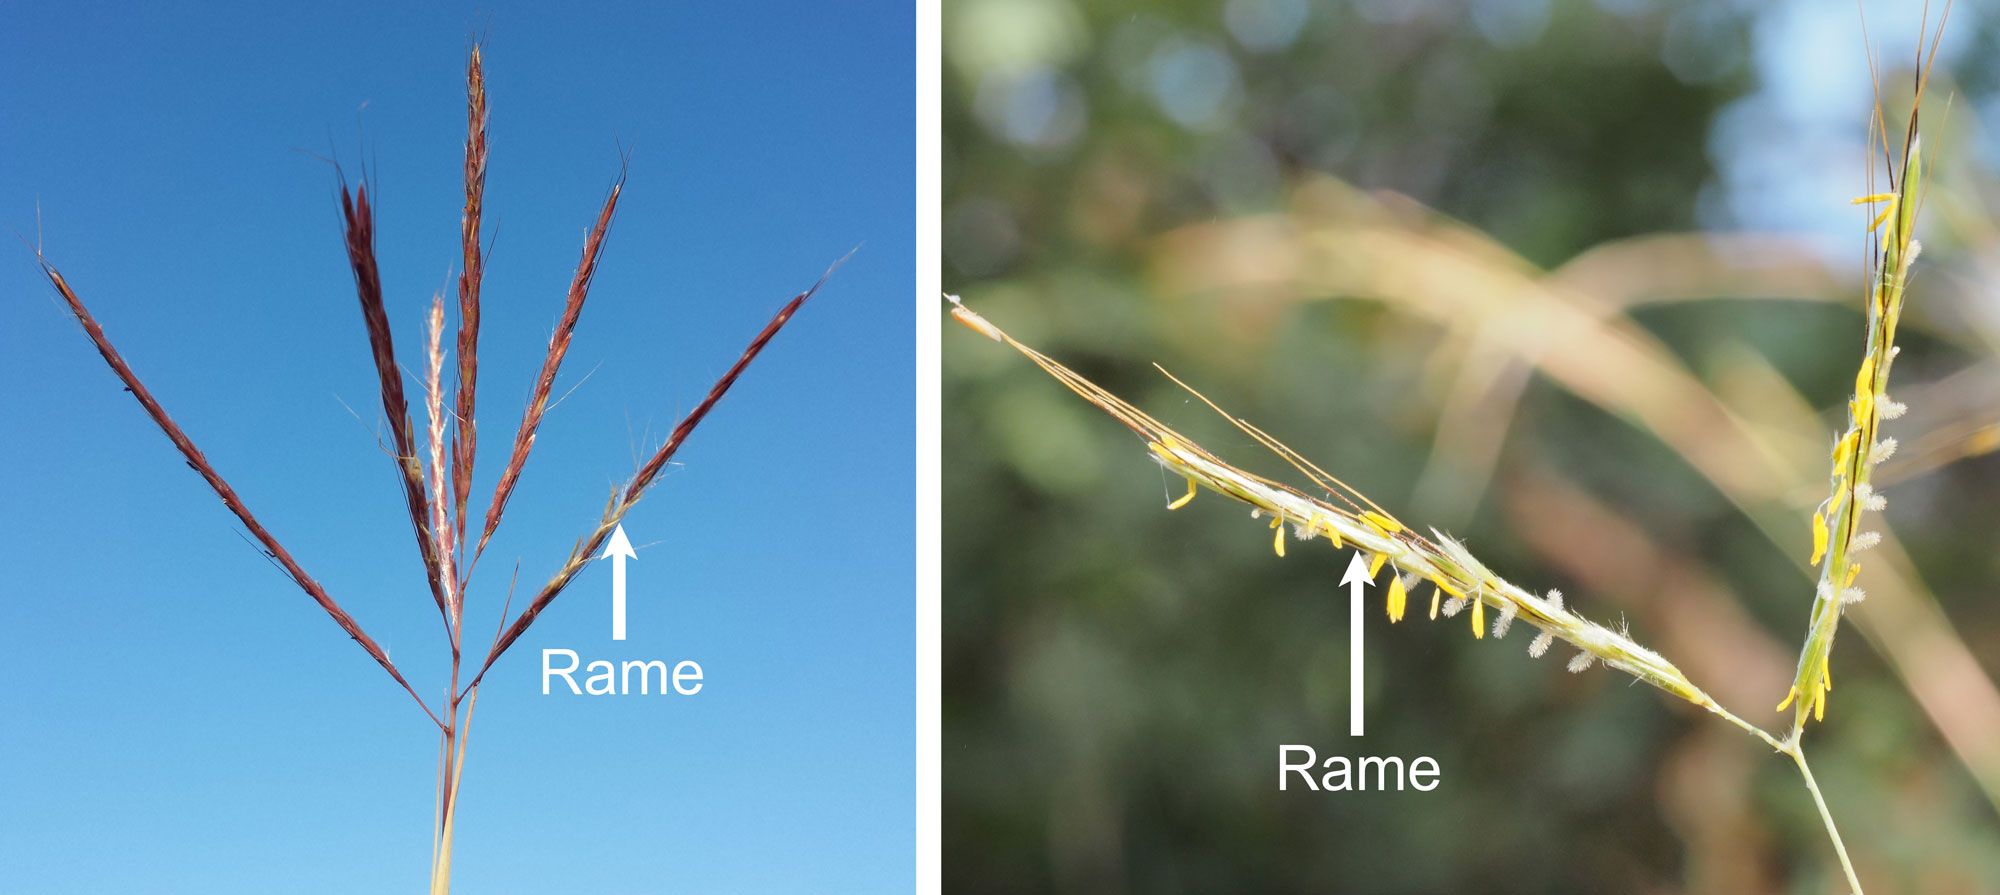 2-panel image showing photographs of rames of inflorescences of yellow bluestem and thatching grass, with a rame labeled on each image.